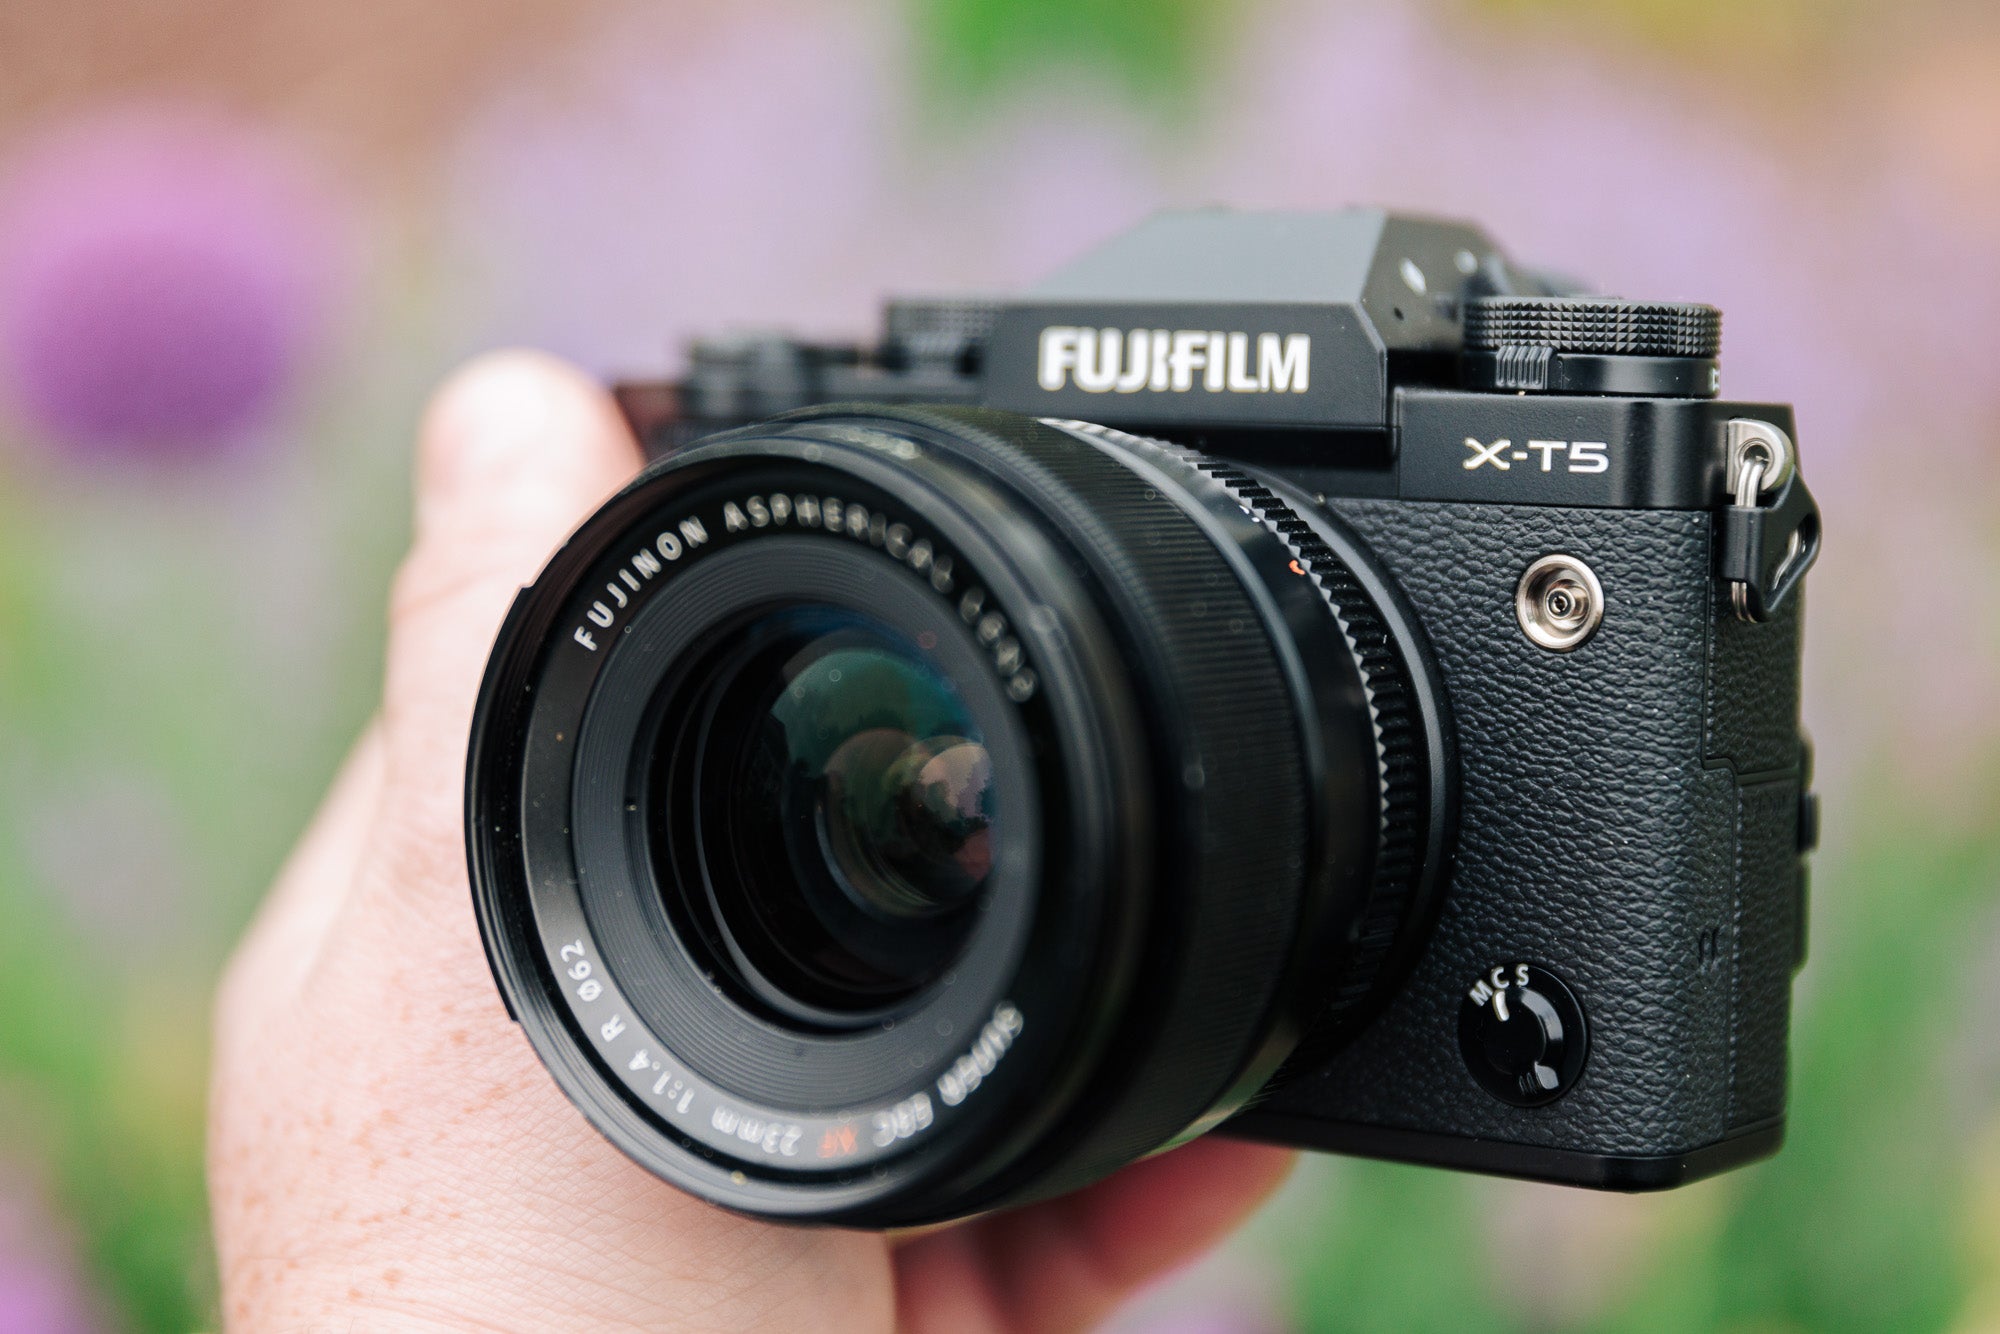 Fujifilm X-T5 in front of blurry flowers at an angle